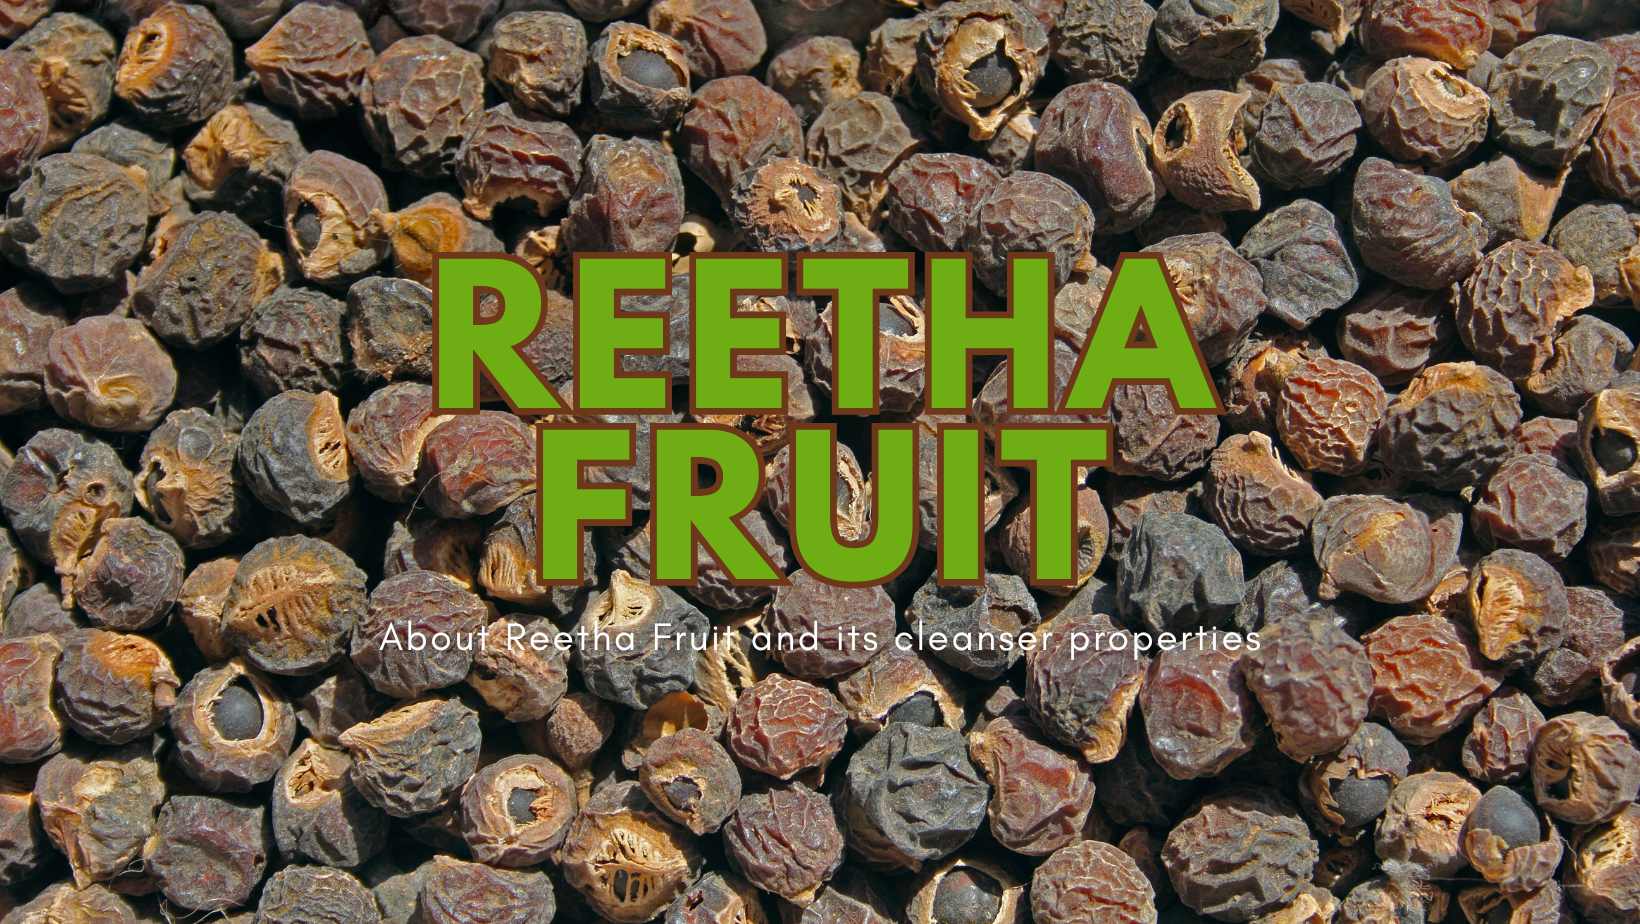 The natural cleansing qualities of Reetha Fruit